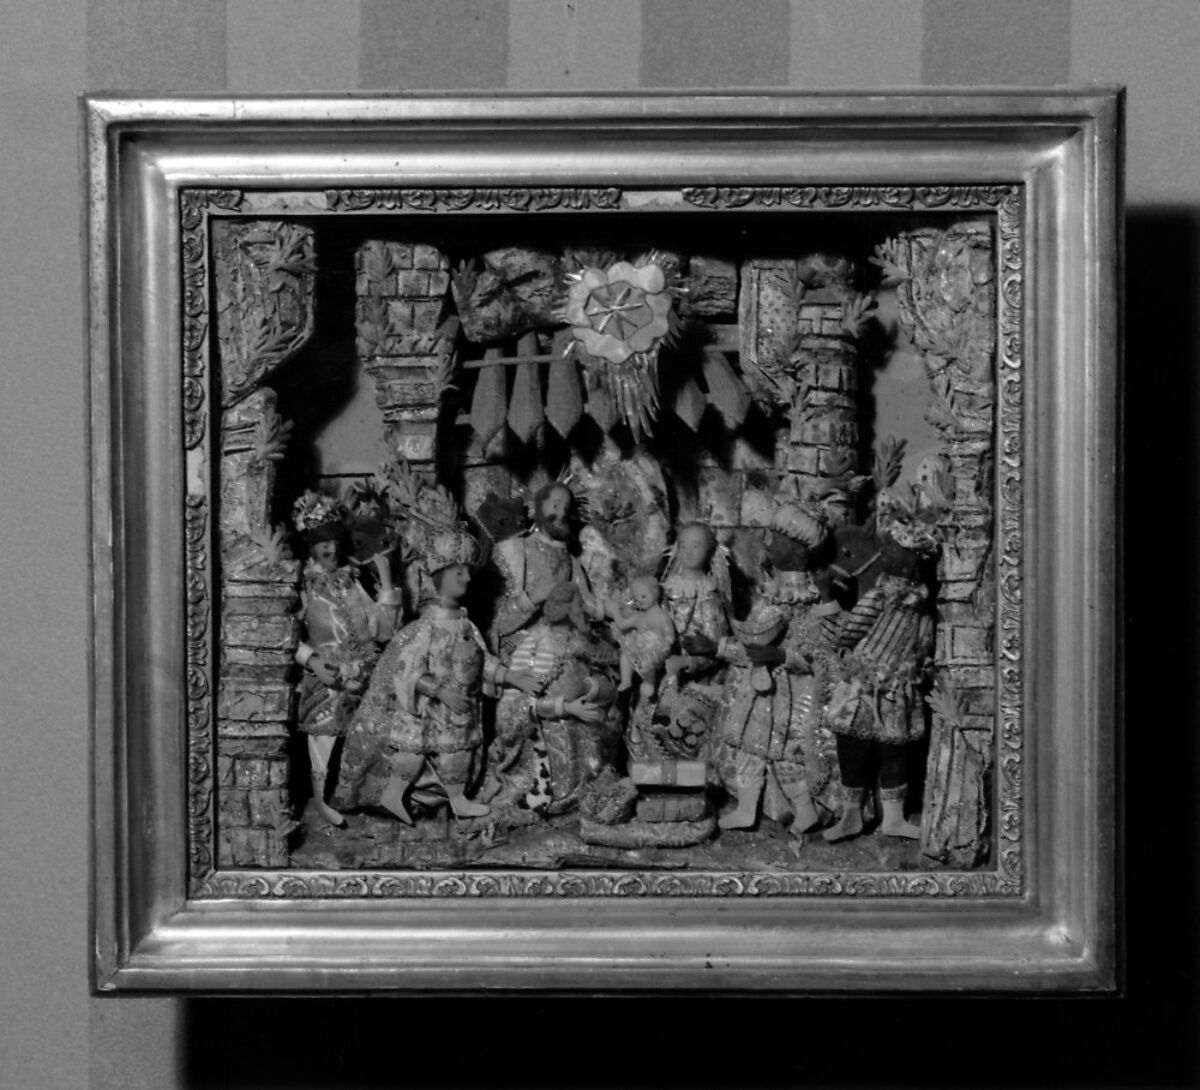 Adoration of the Magi, Wax, fabric, glass, possibly French, Provence 